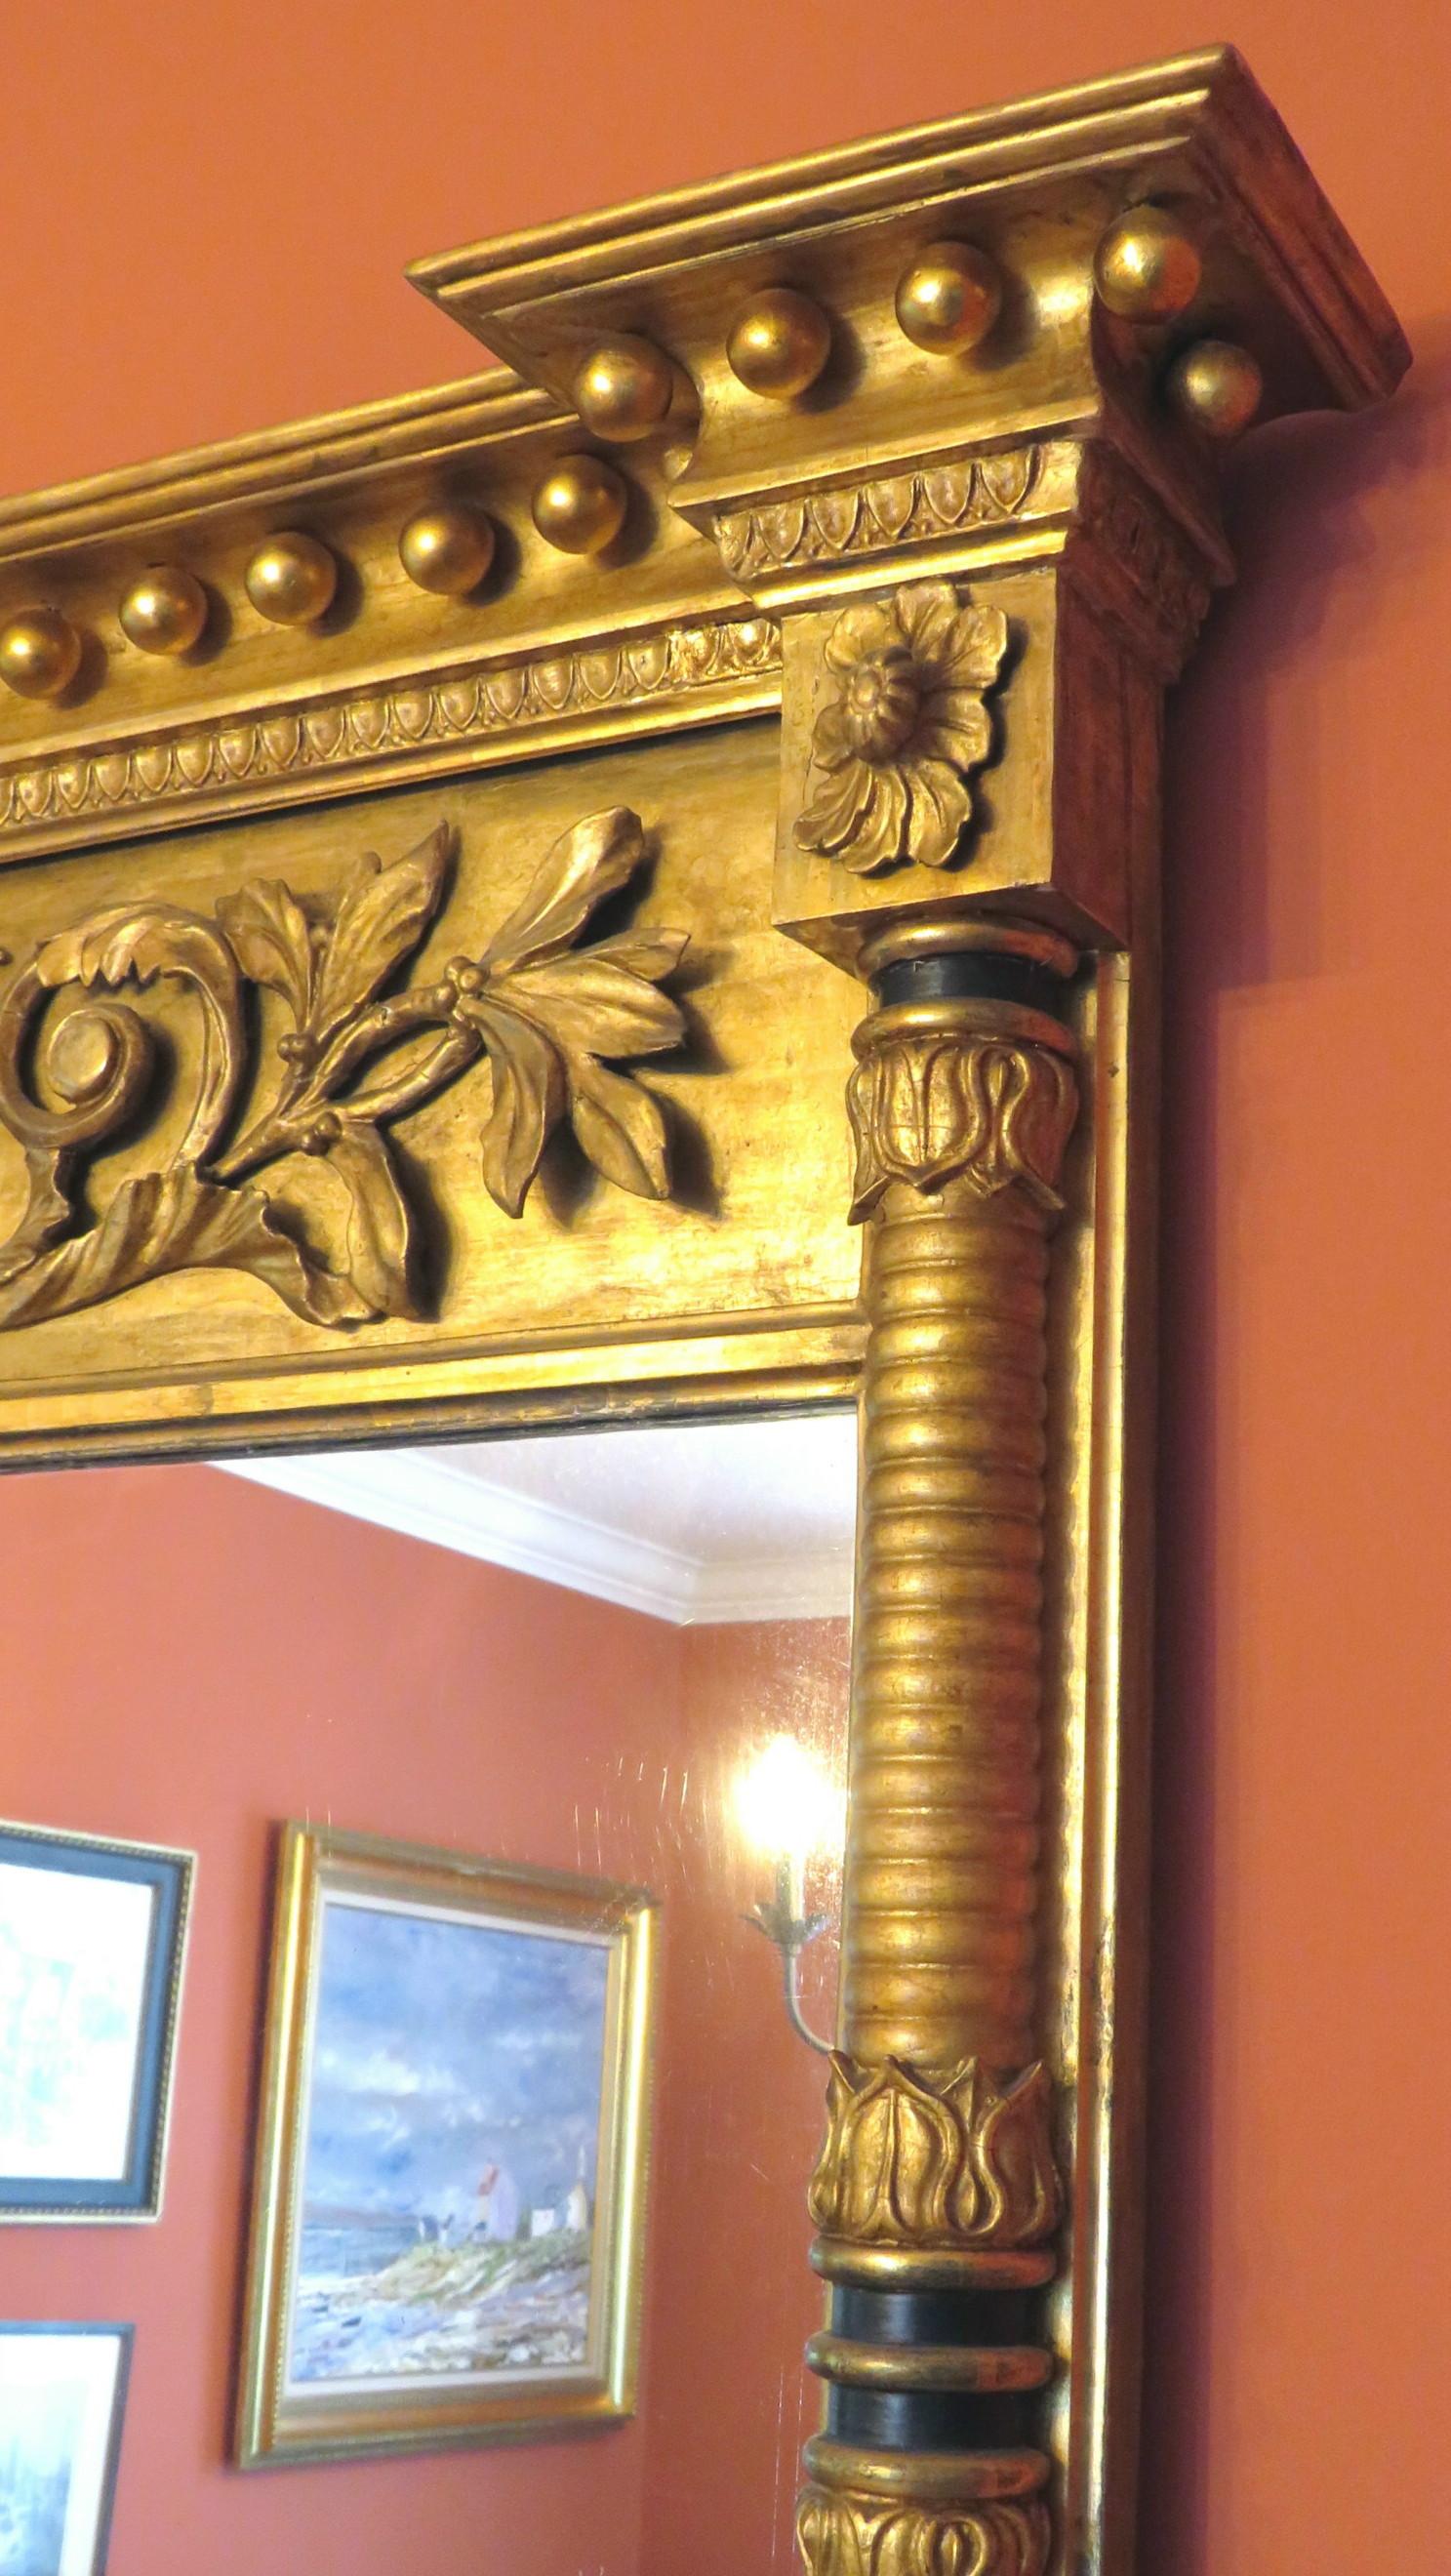 An outstanding Regency period giltwood over-mantel mirror featuring an architectural cornice decorated with hand-applied gilt spherules, overtop a panel with applied foliate elements in high relief above a later rectangular plate flanked by ringed